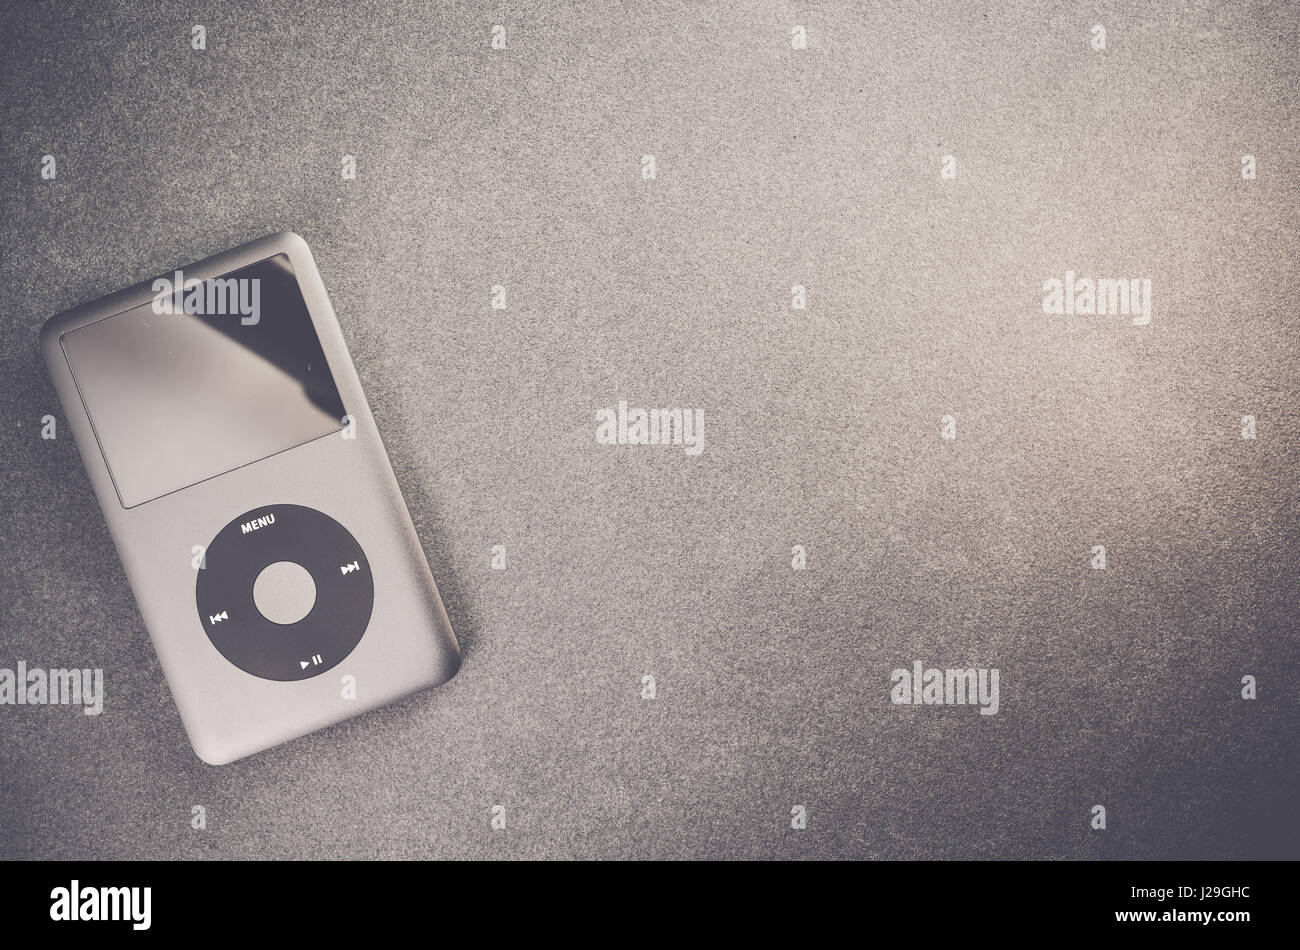 Apple ipod classic music player on a stone surface - top view Stock Photo